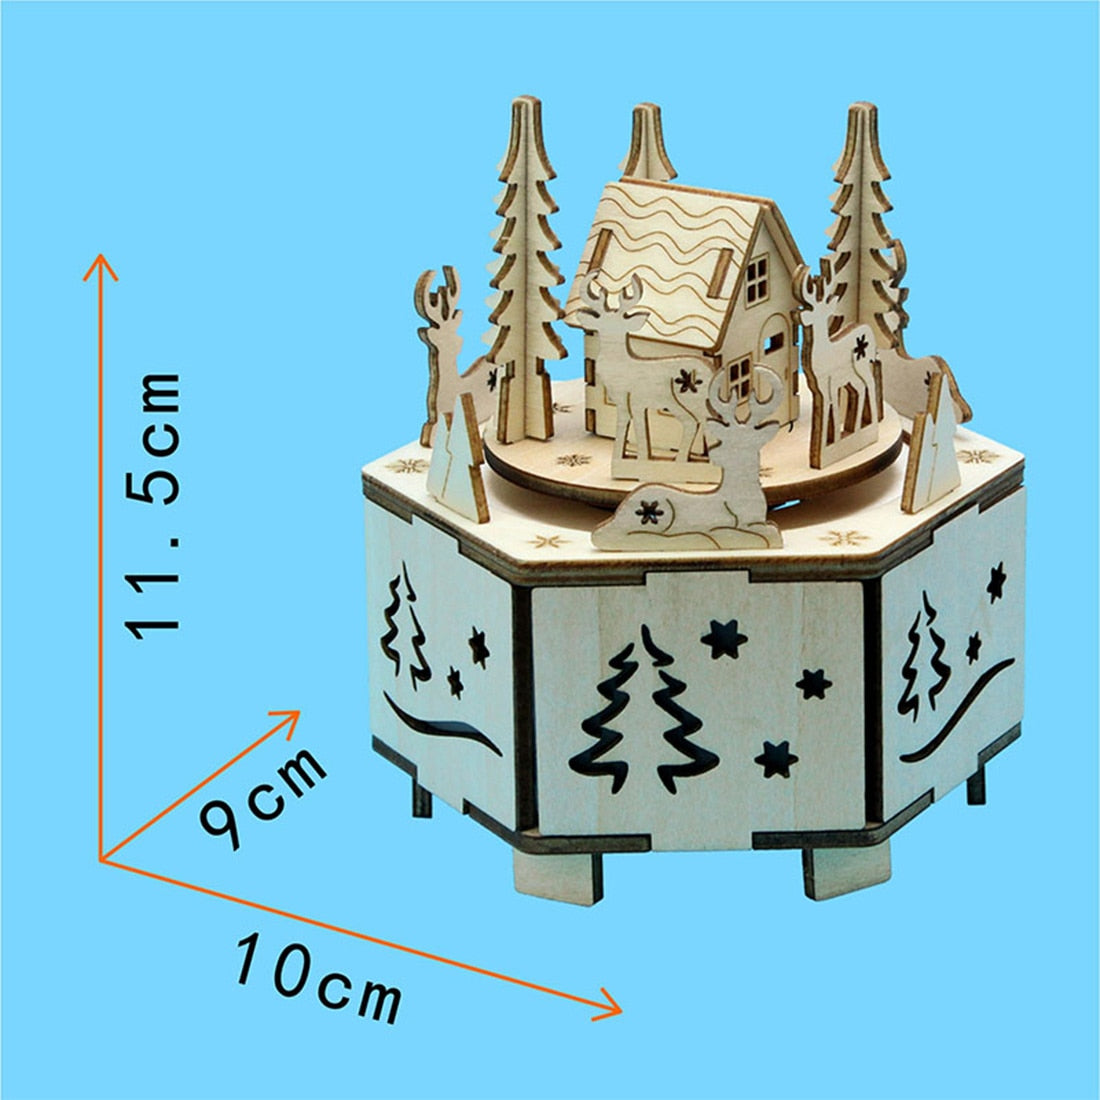 DIY Creative Wooden Puzzle Model Kit Assembly Music Box With LED Light